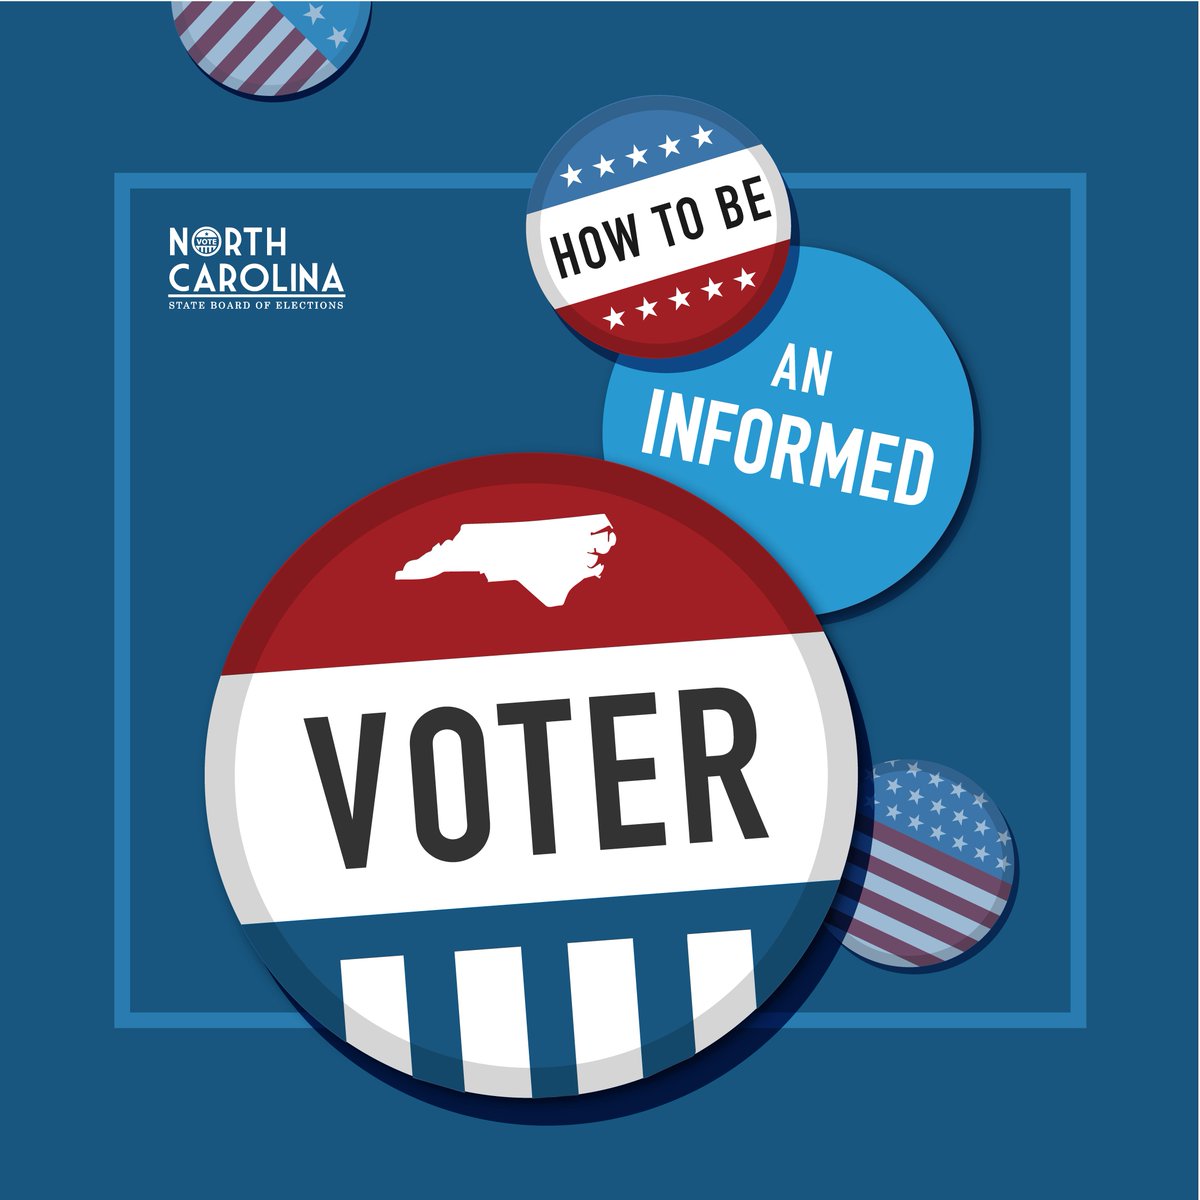 Planning for accurate elections starts months, even years, before Election Day. Routine preparations include registering voters, procuring polling places, training poll workers, preparing voting equipment & more. Learn more: bit.ly/3FkkSMA #YourVoteCountsNC #ncpol